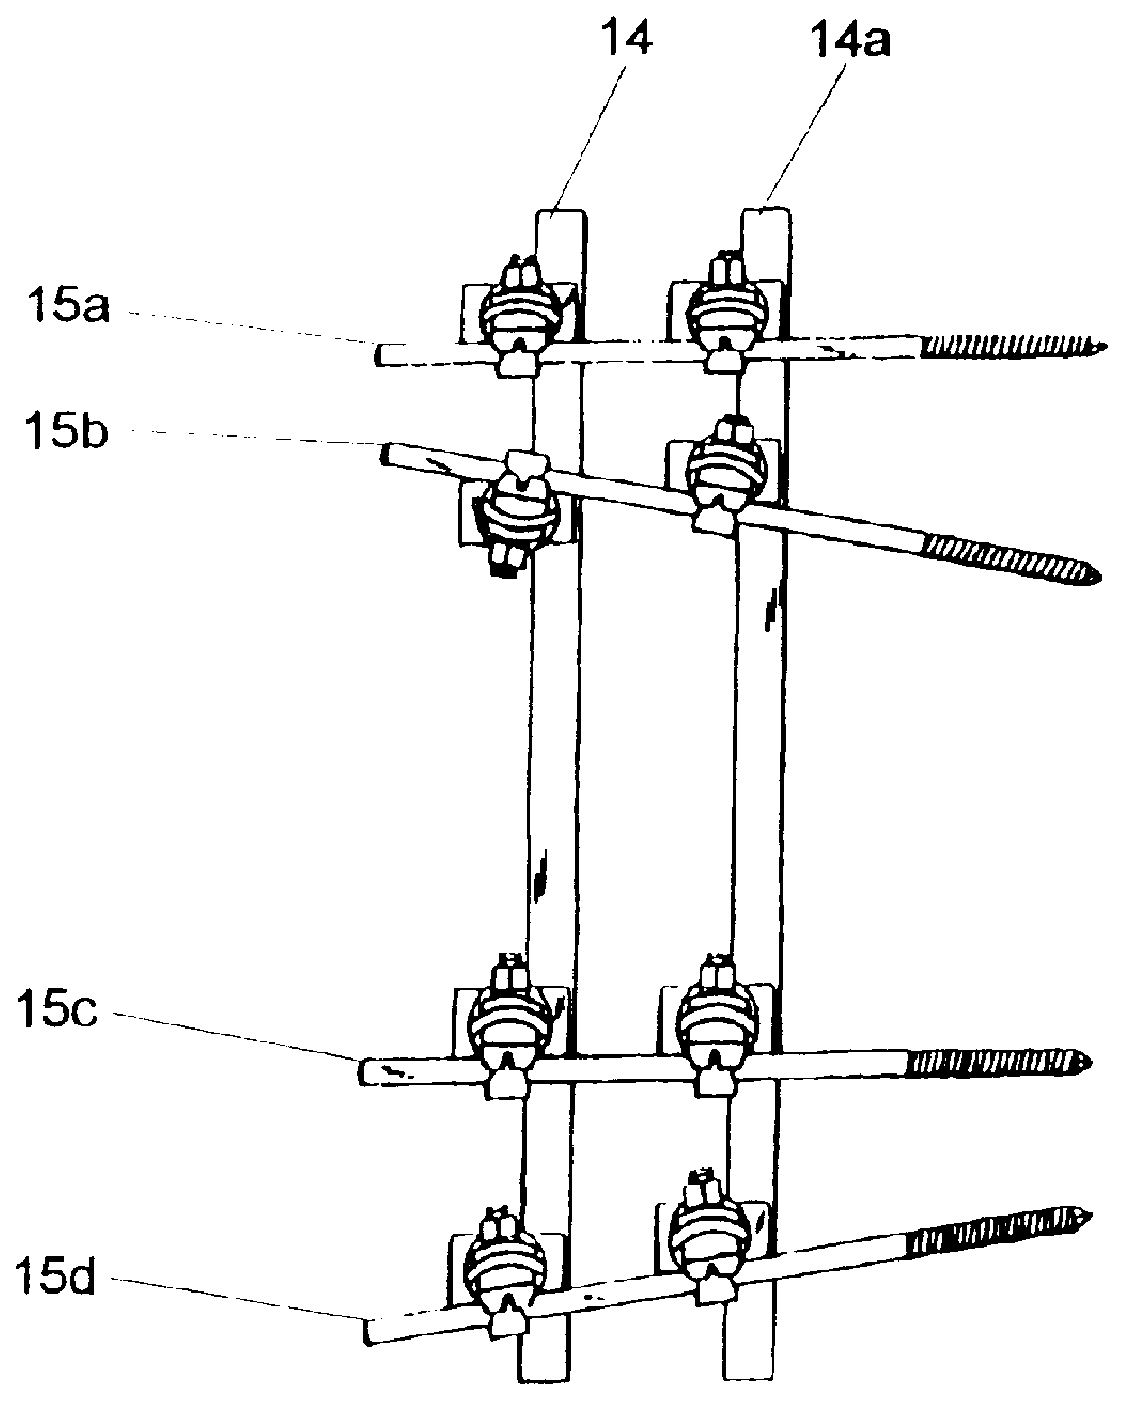 Clamping connection for medical equipment and apparatus